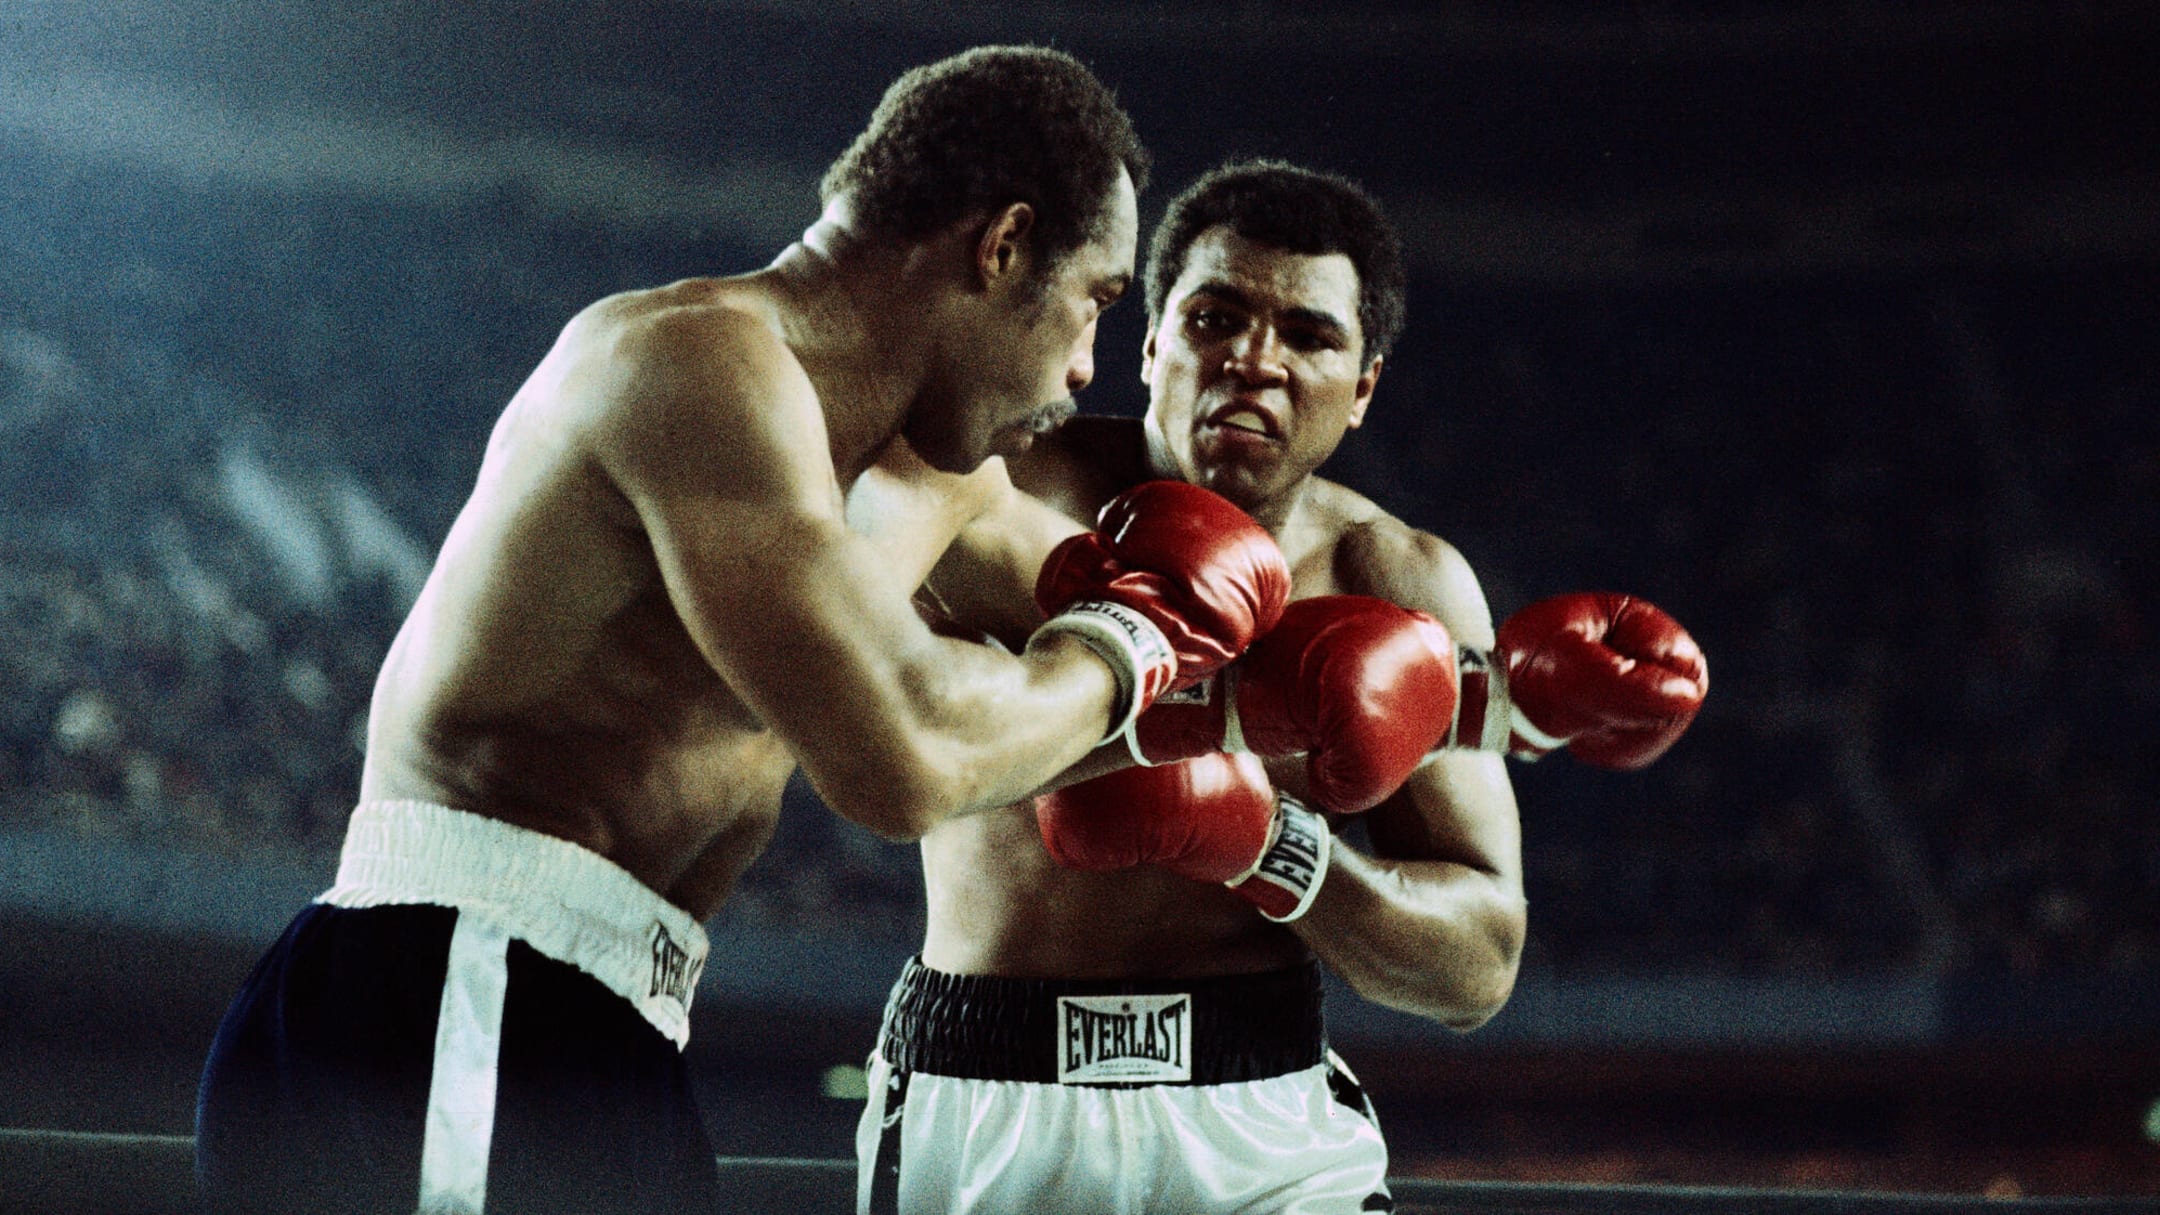 30 Best Knockout Punches in Boxing History